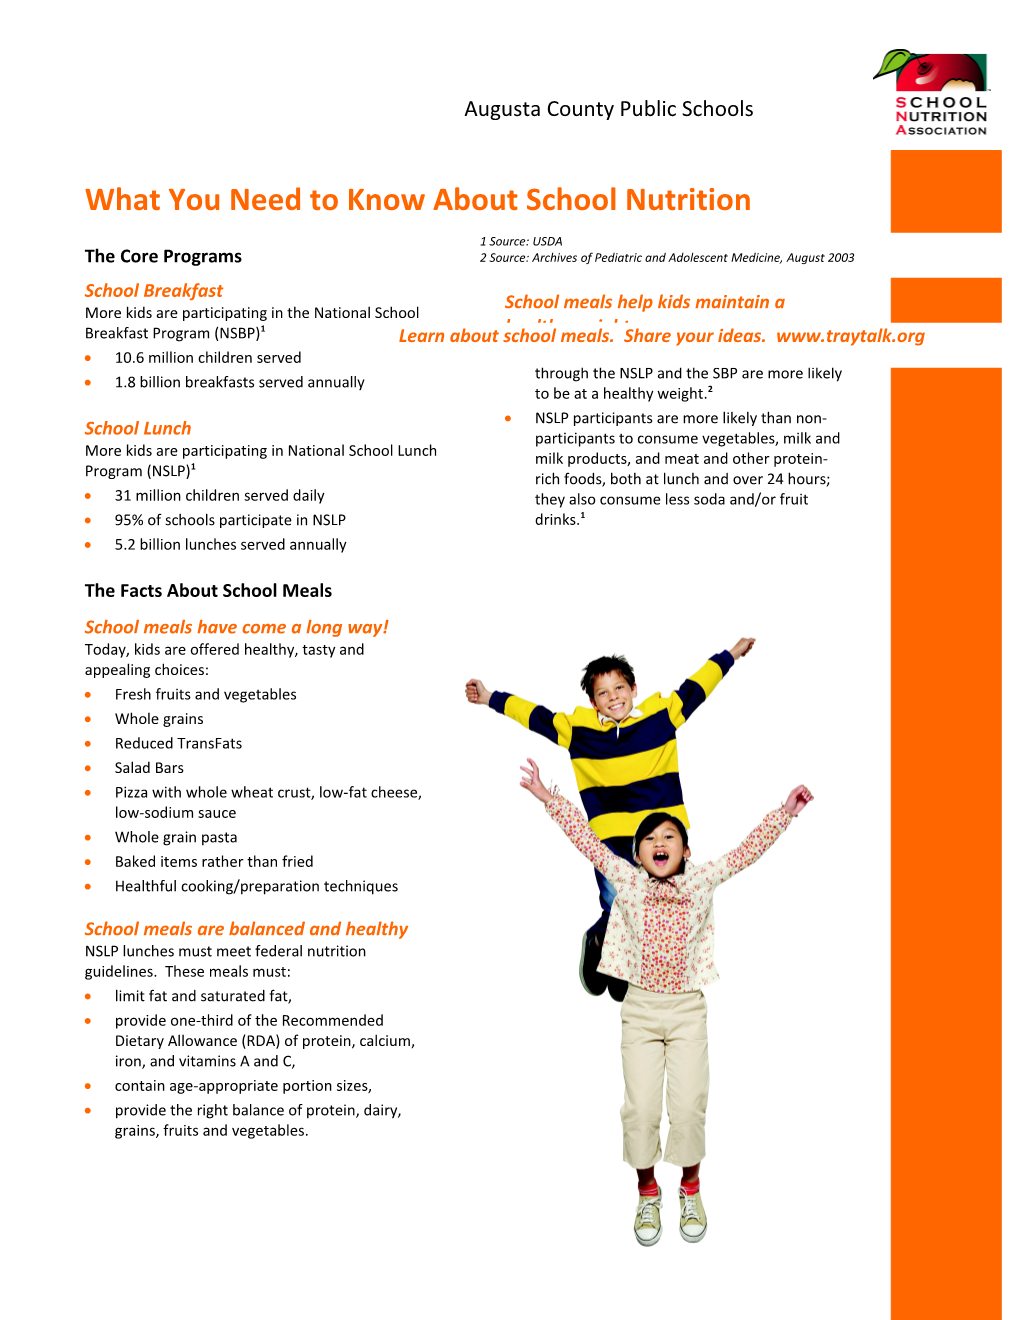 What You Need to Know About School Nutrition